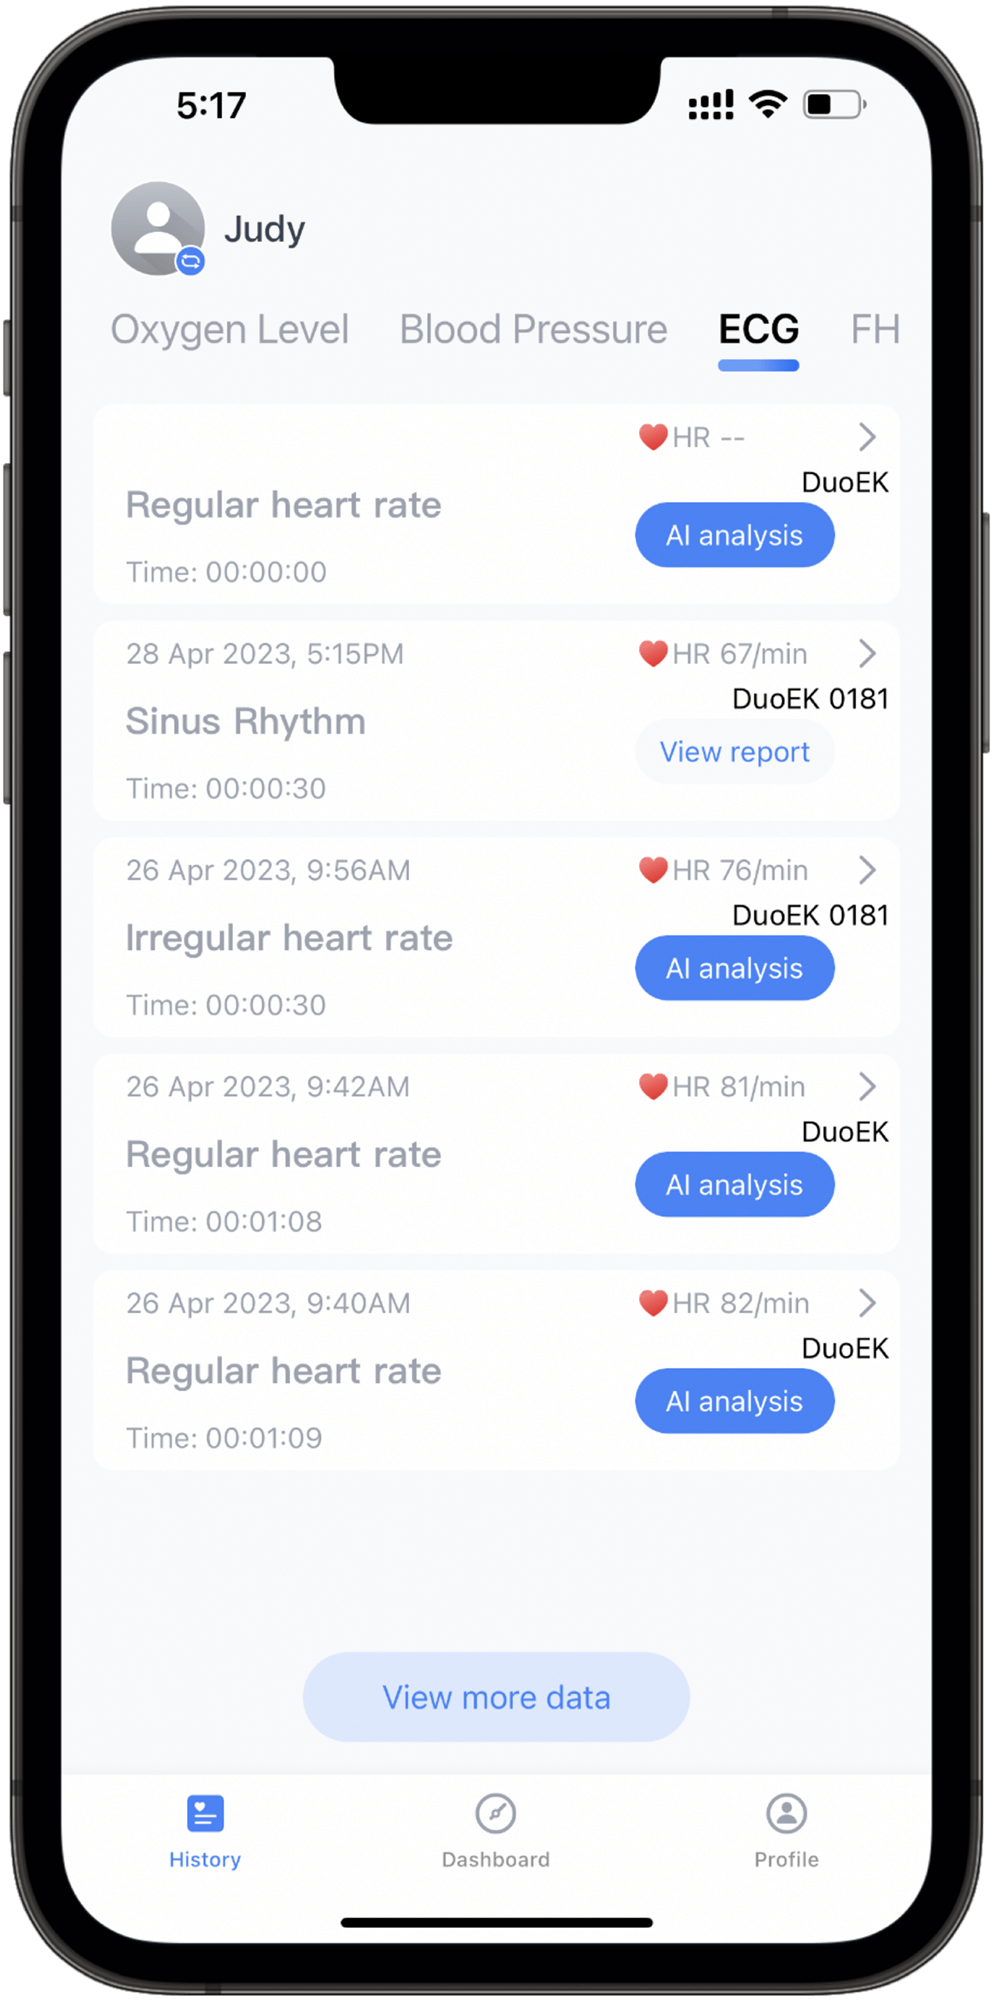 record and share ecg reports via app